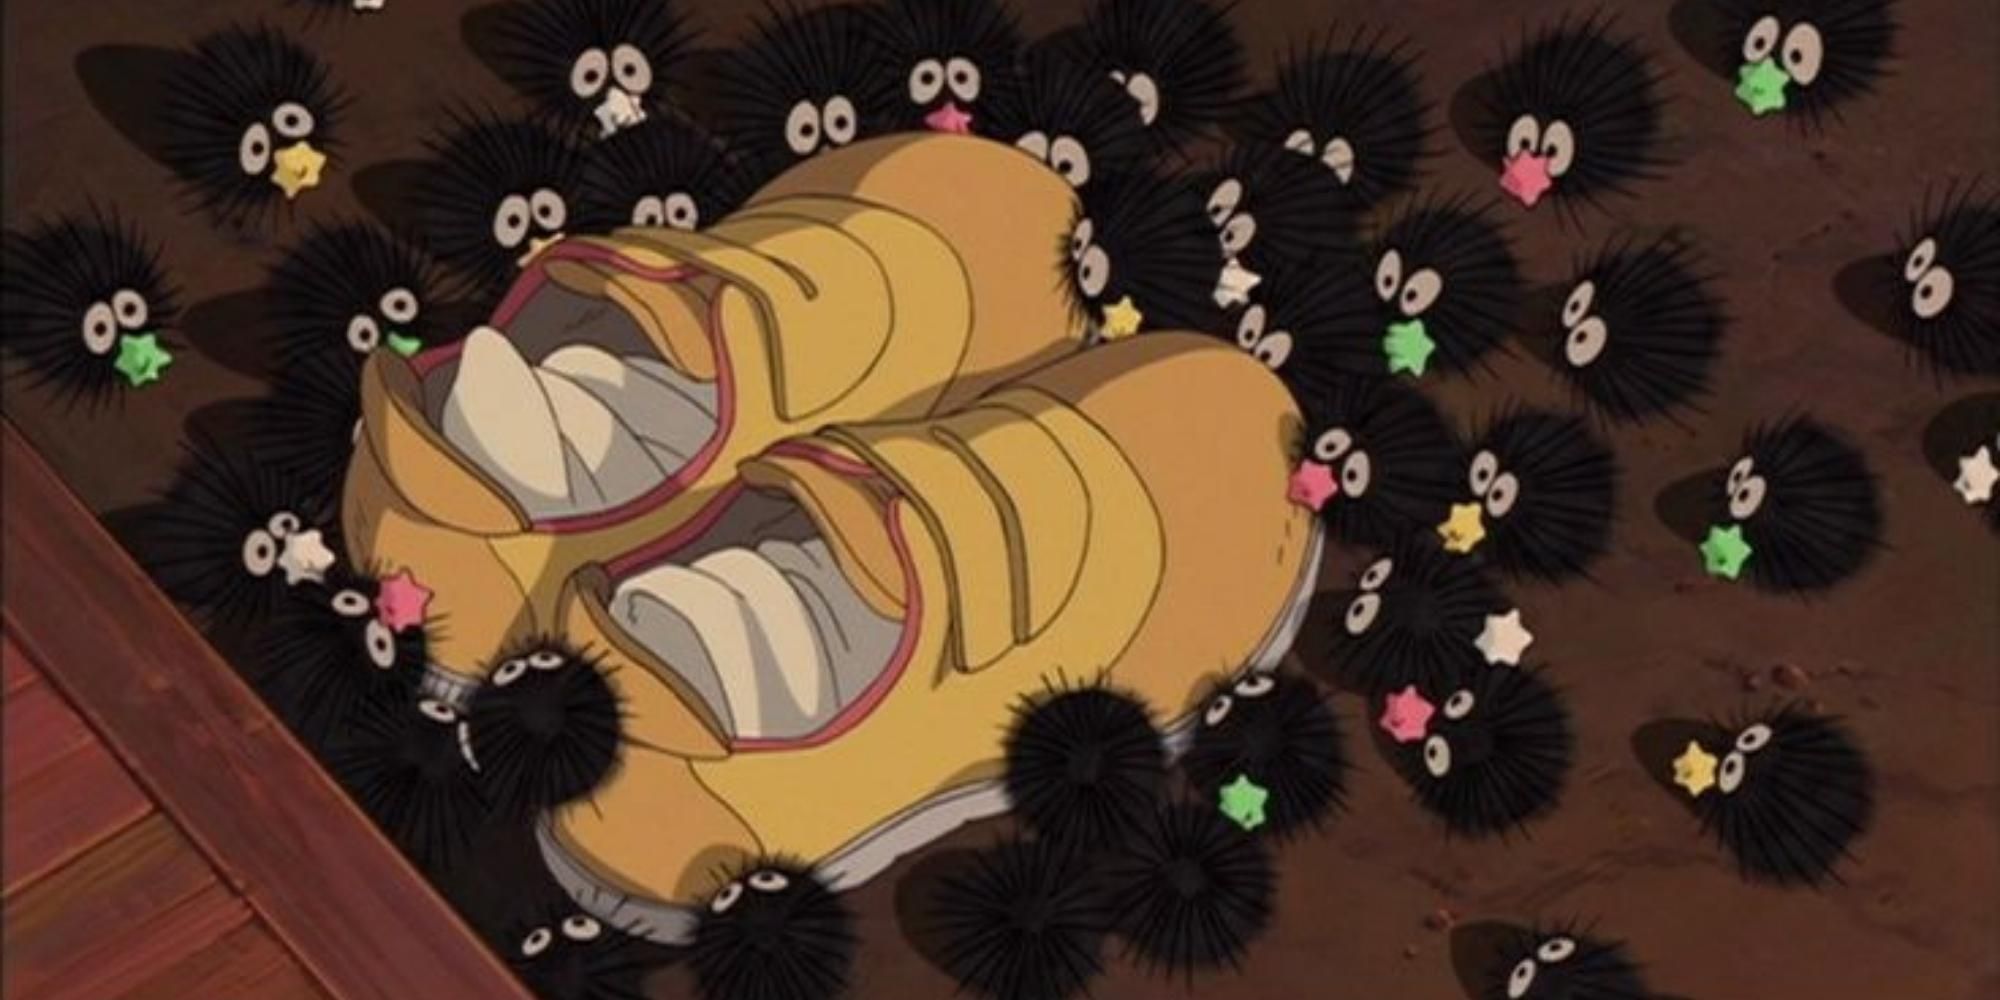 Soot Sprites take Chihiro's Shoes in Spirited Away